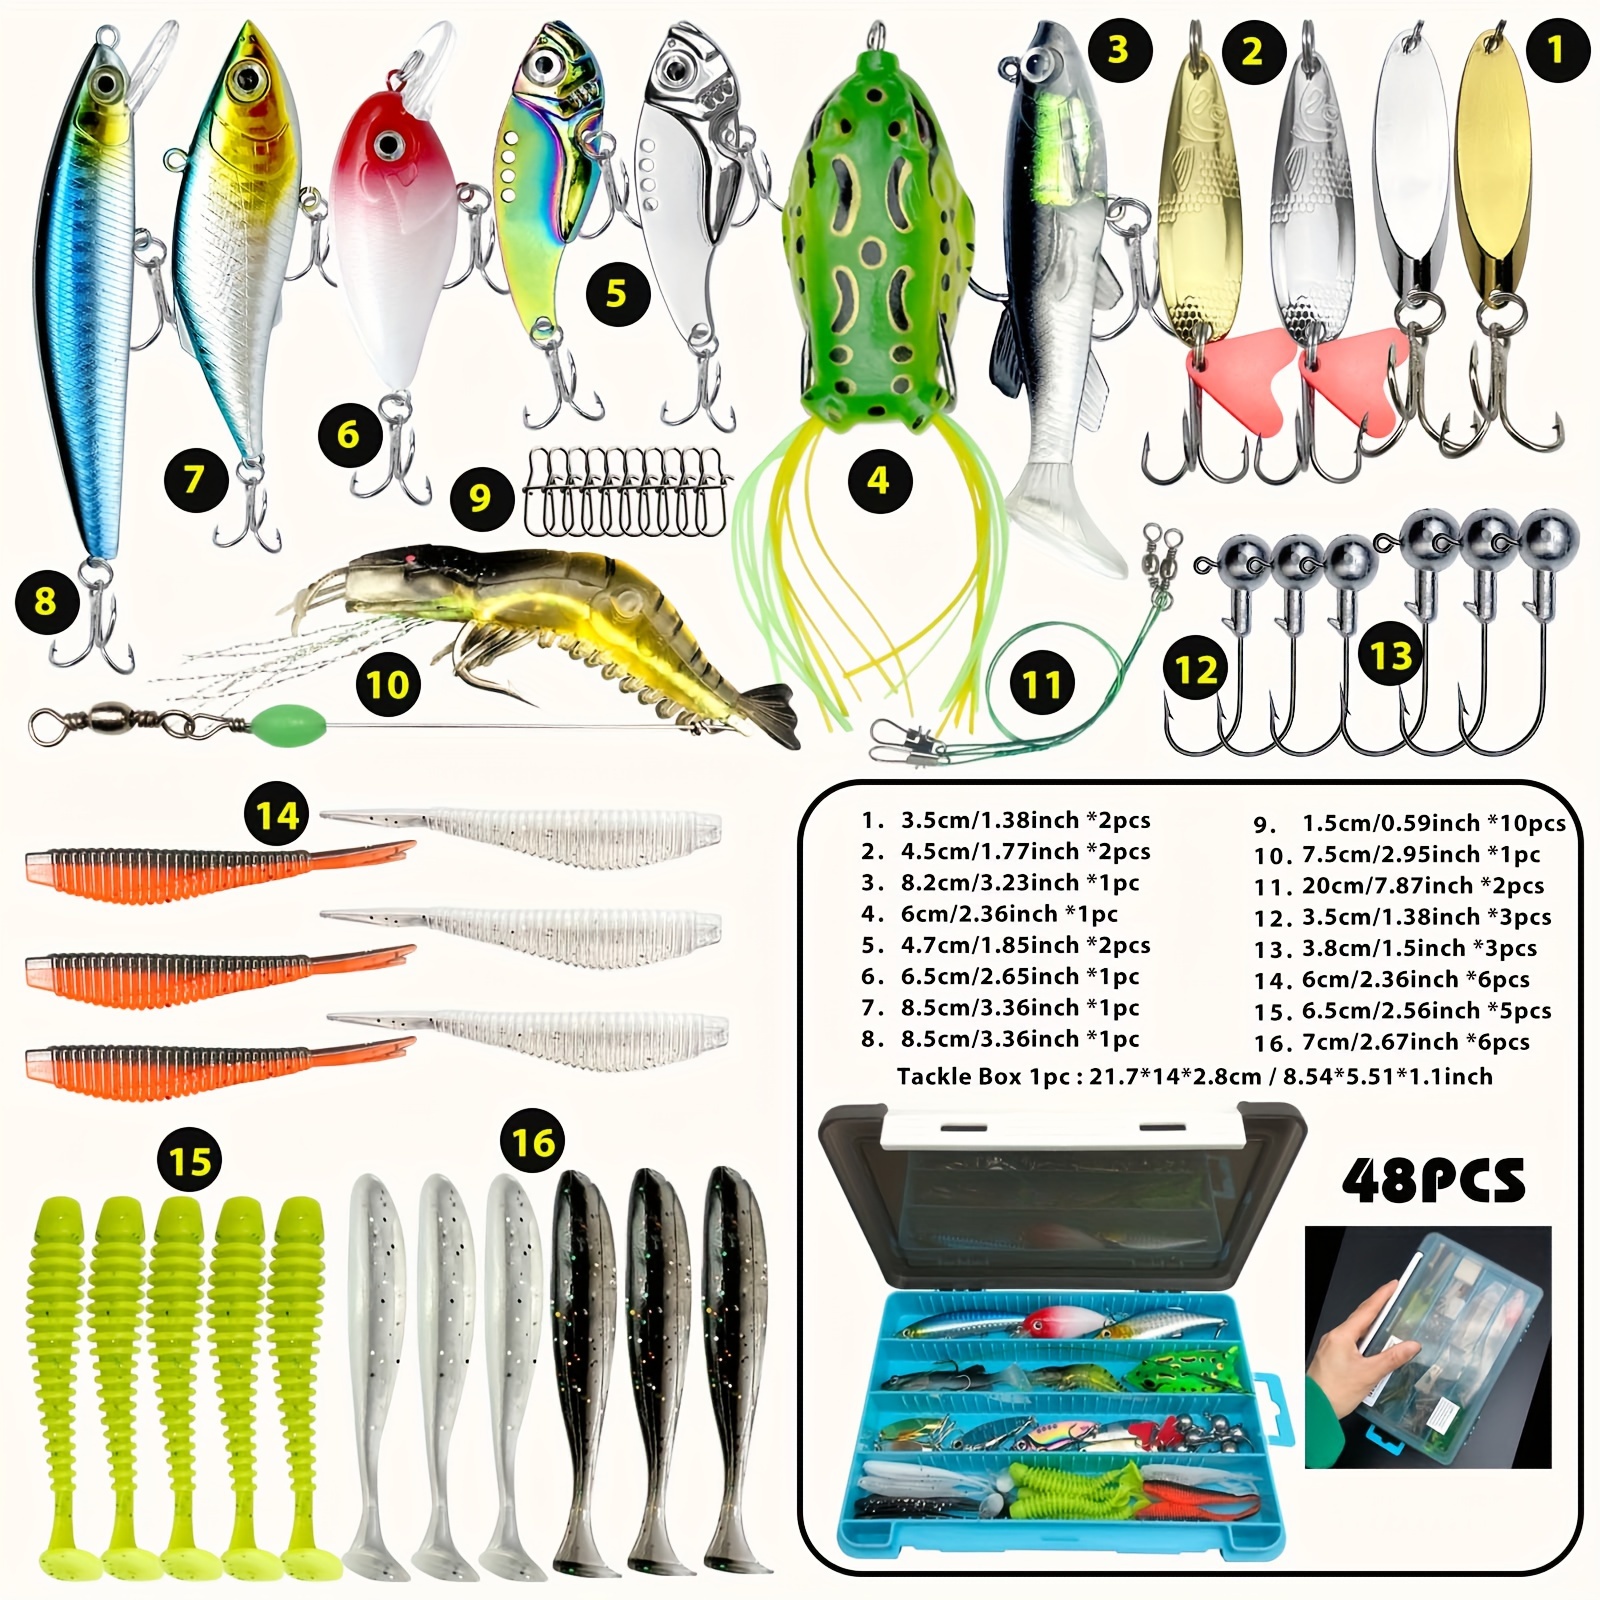 XYZsundy Fishing Lures Kit Set Including Fishing Stuff Tackle Box  Accessories Hooks, Worms, jigs, Fishing Bait for bass, Crappie ,Trout,  Whopper